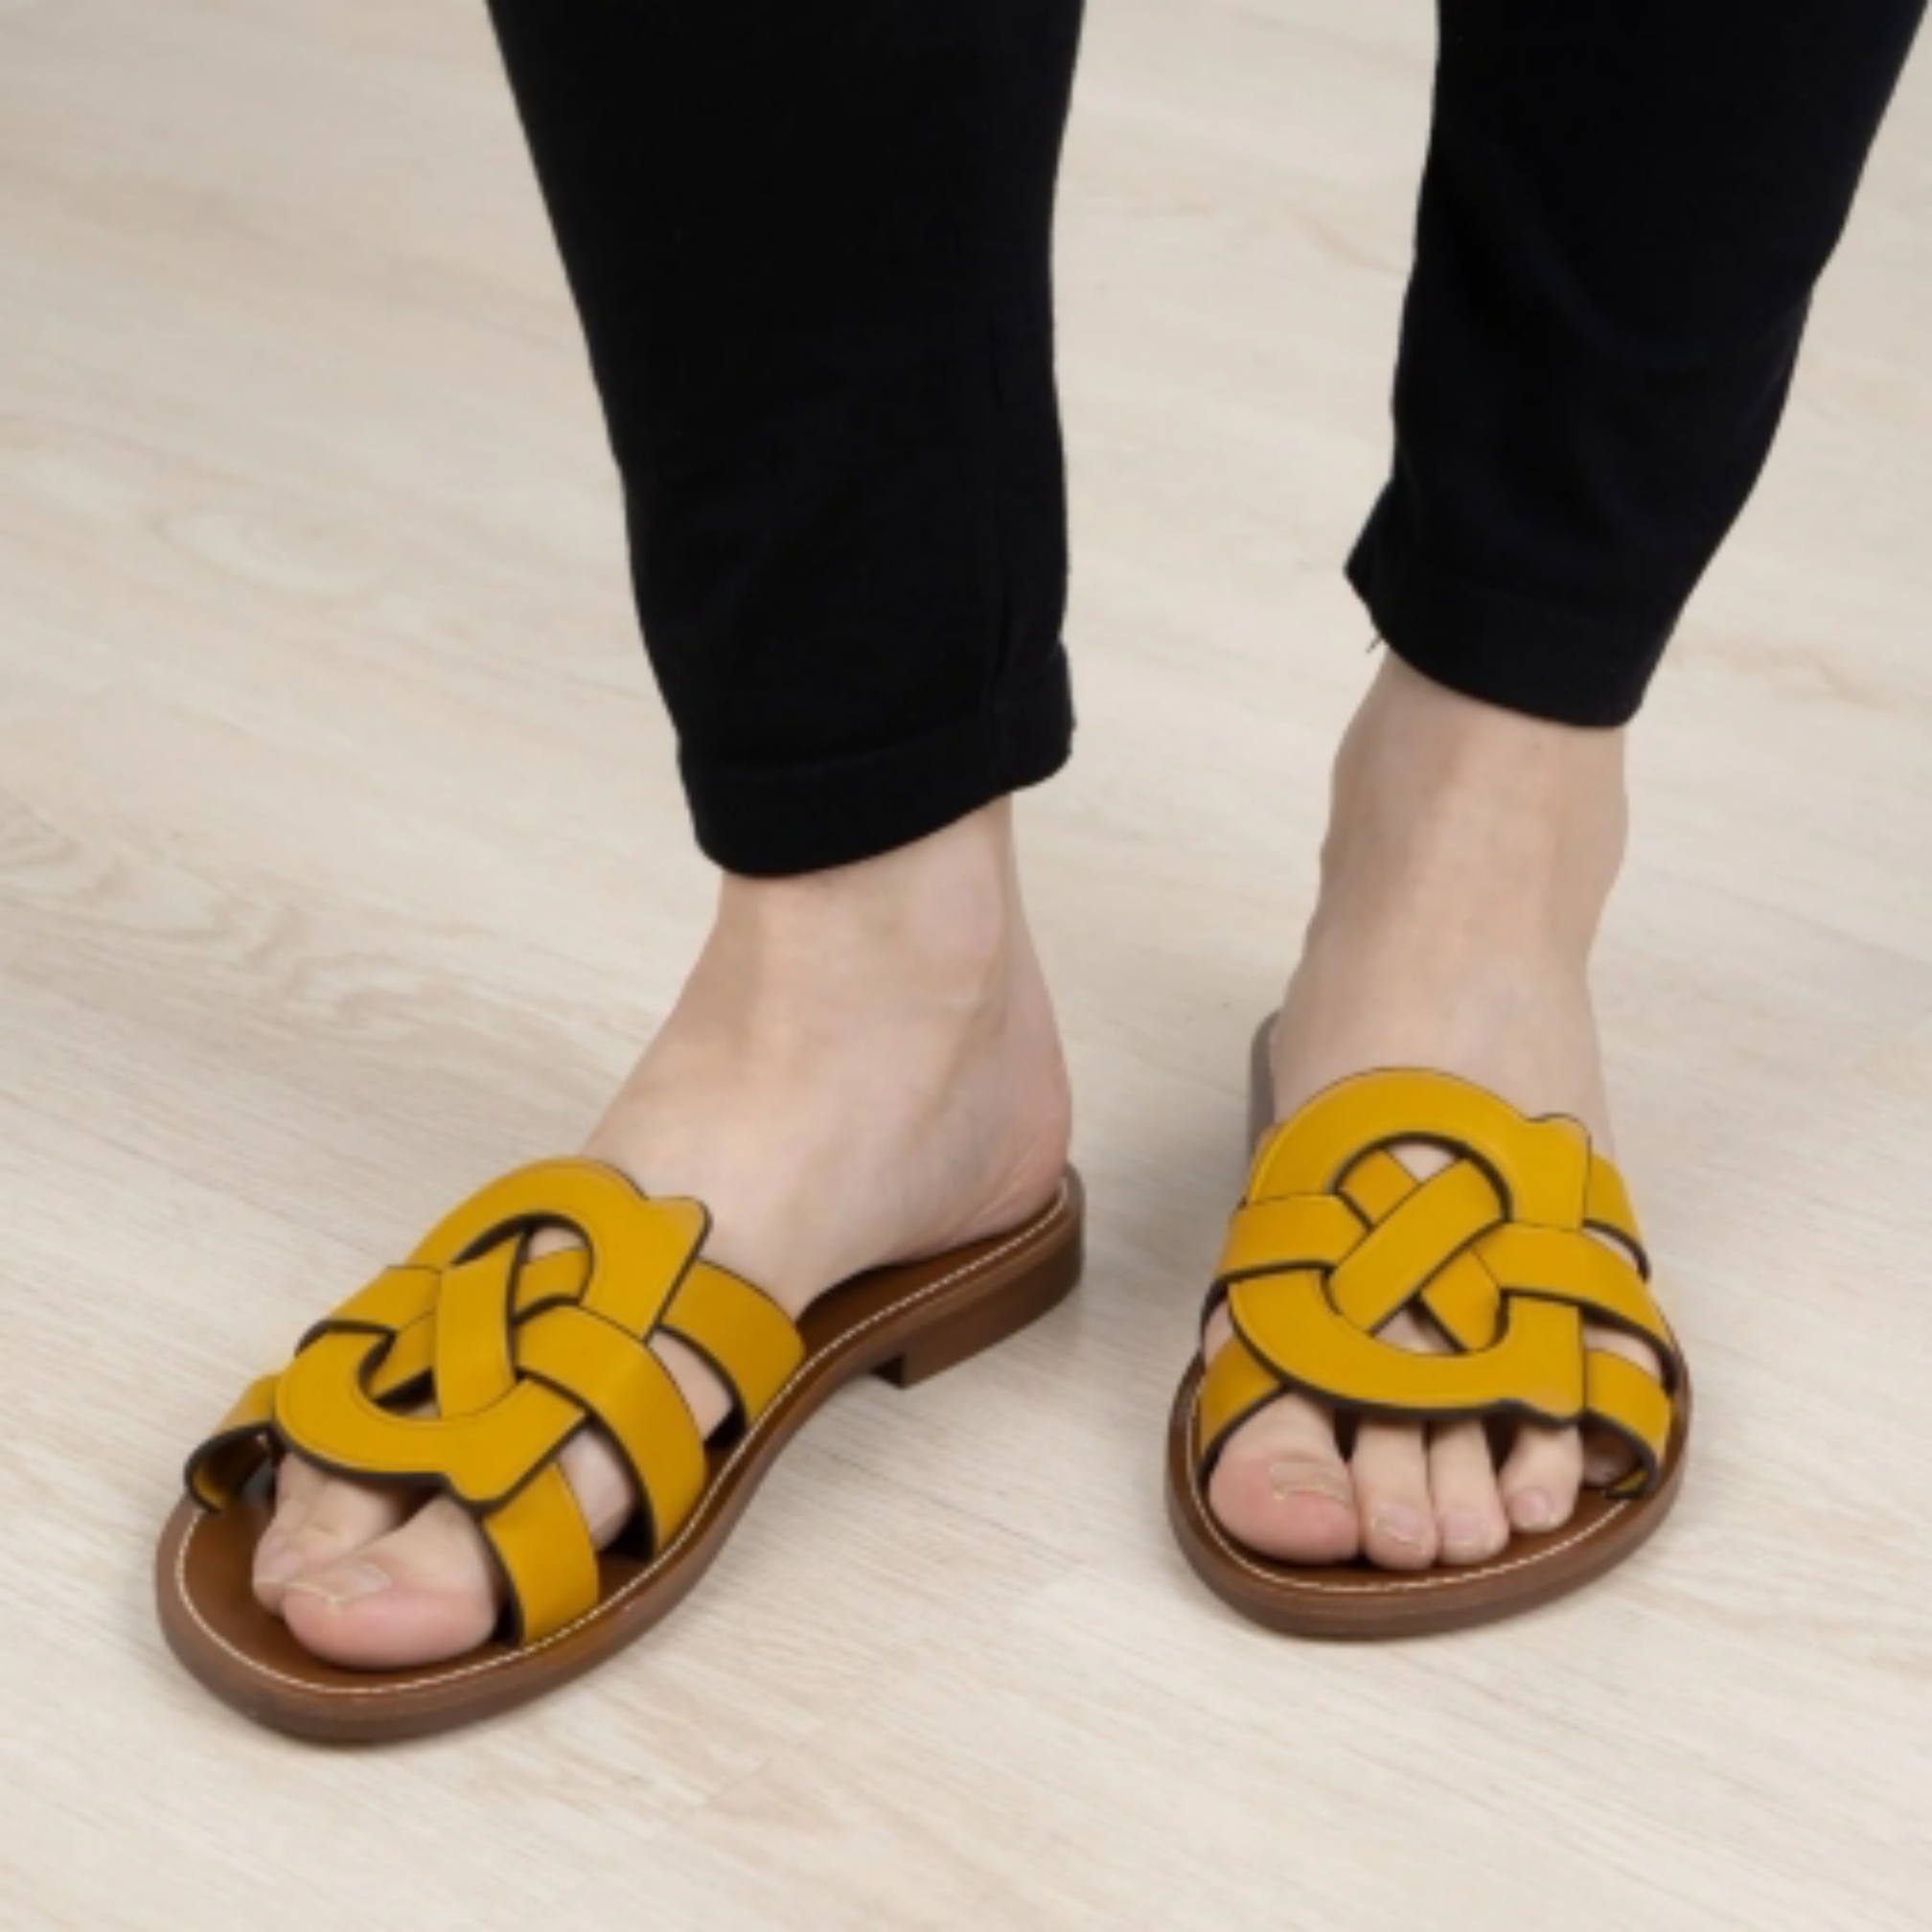 Coach Issa Sandals Flat Leather Yellow 